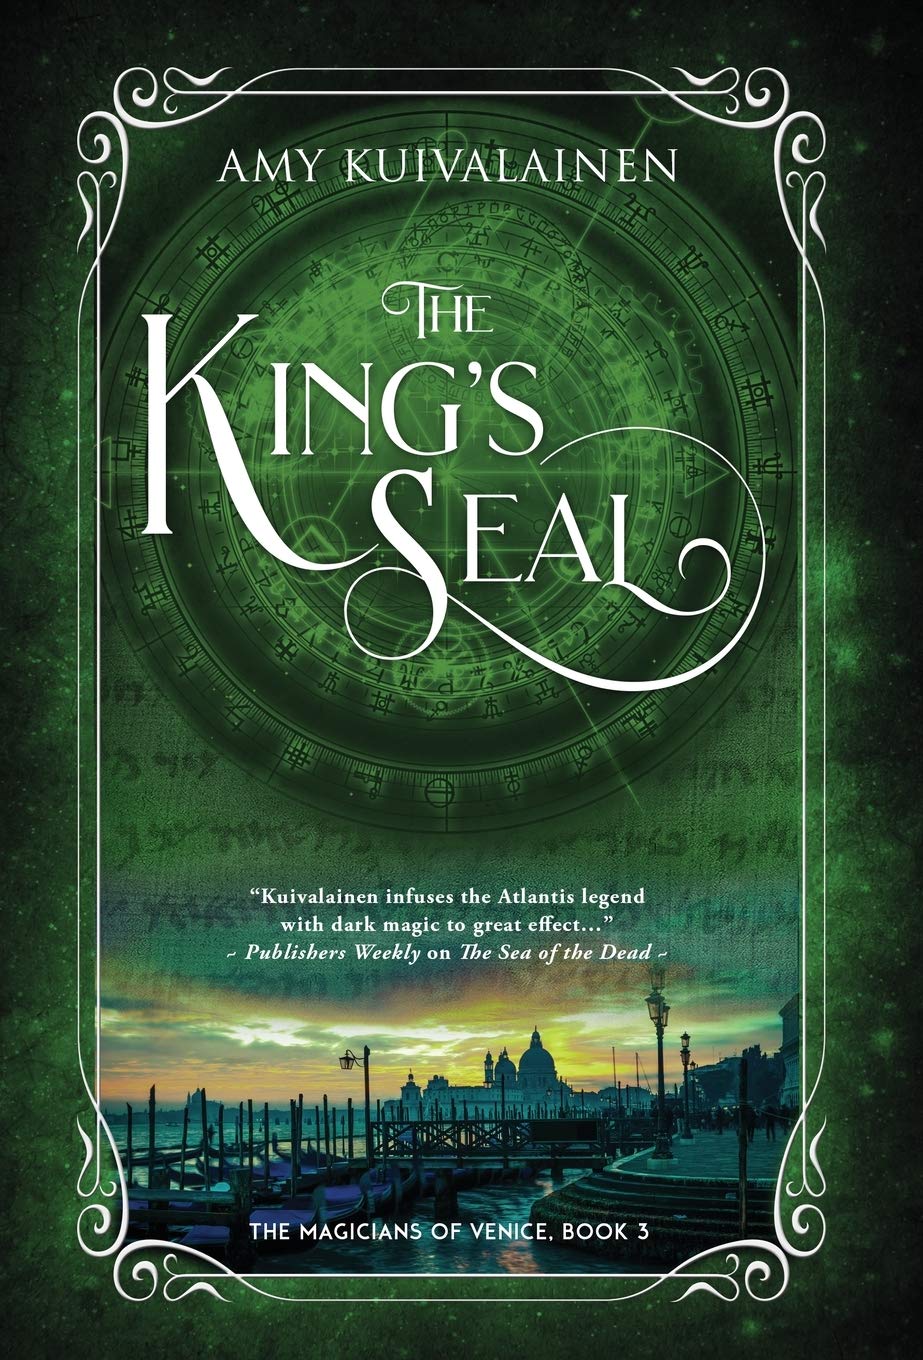 Cover for Amy Kuivalainen's book 'The King's Seal'. It follow the same designs as the previous books in the series, though this cover is in green.